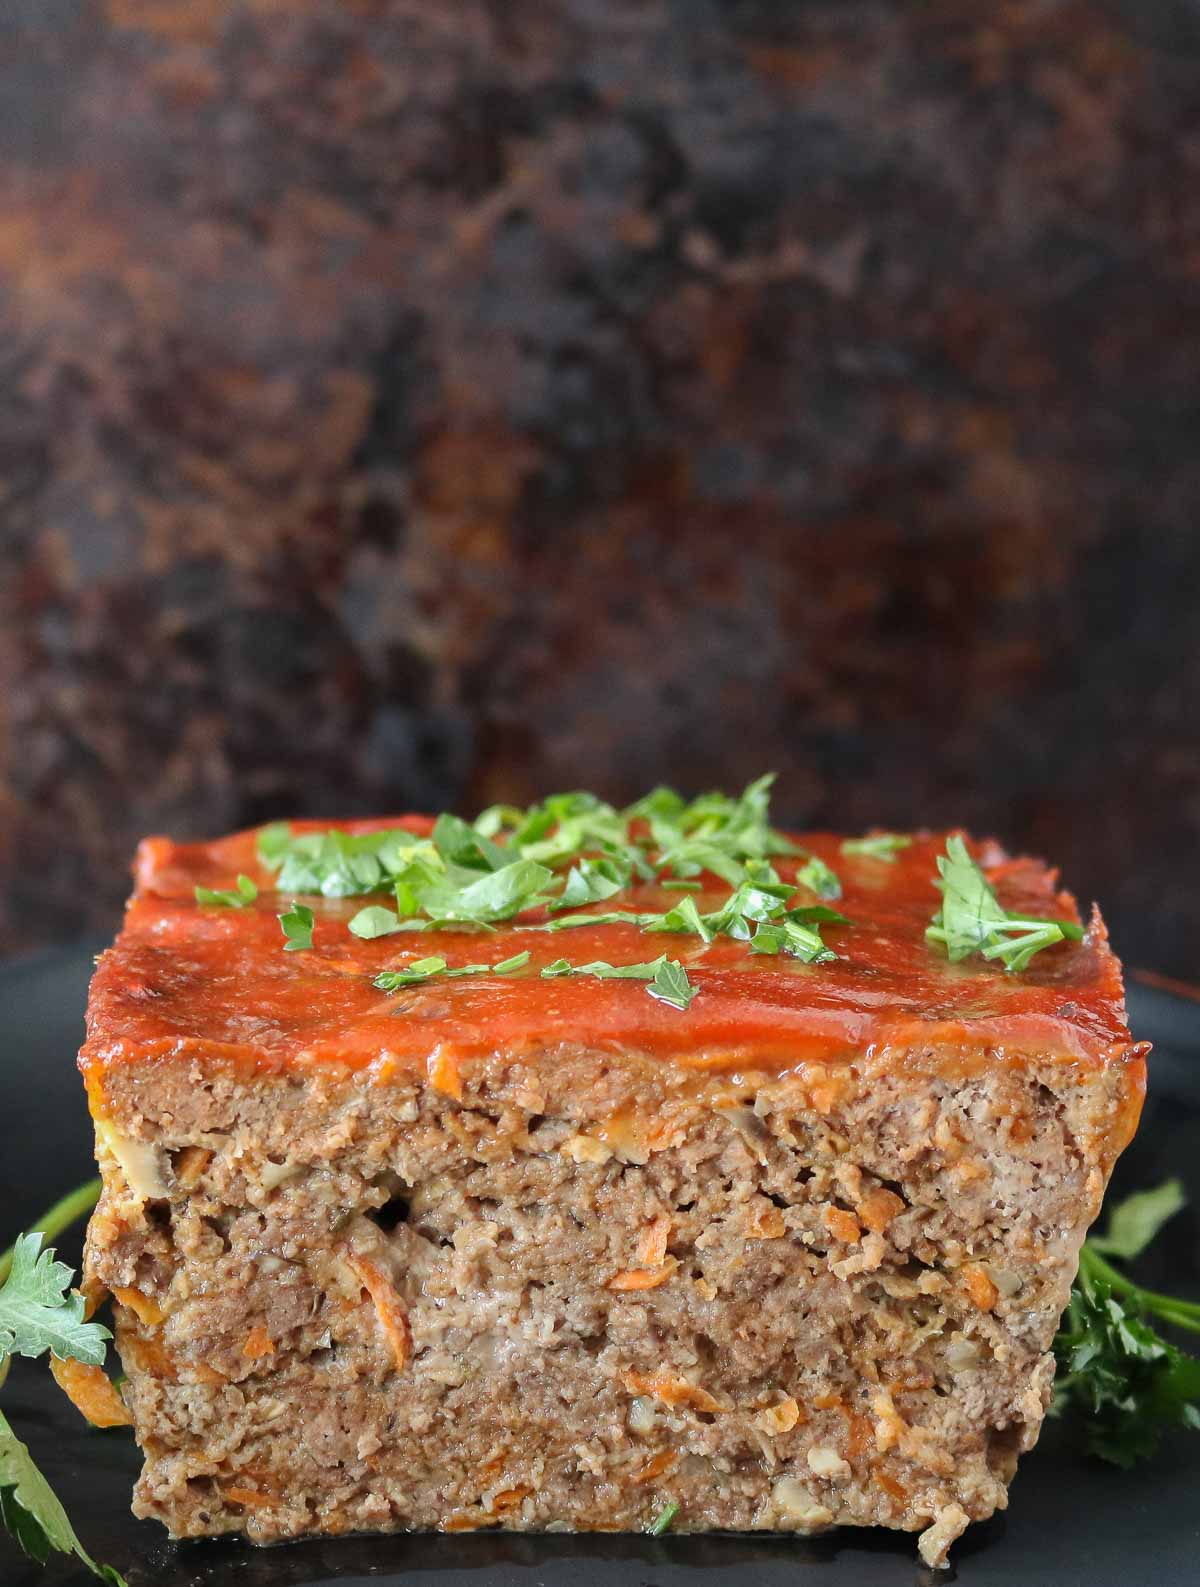 Cut meatloaf on a serving platter, showing the interior texture.